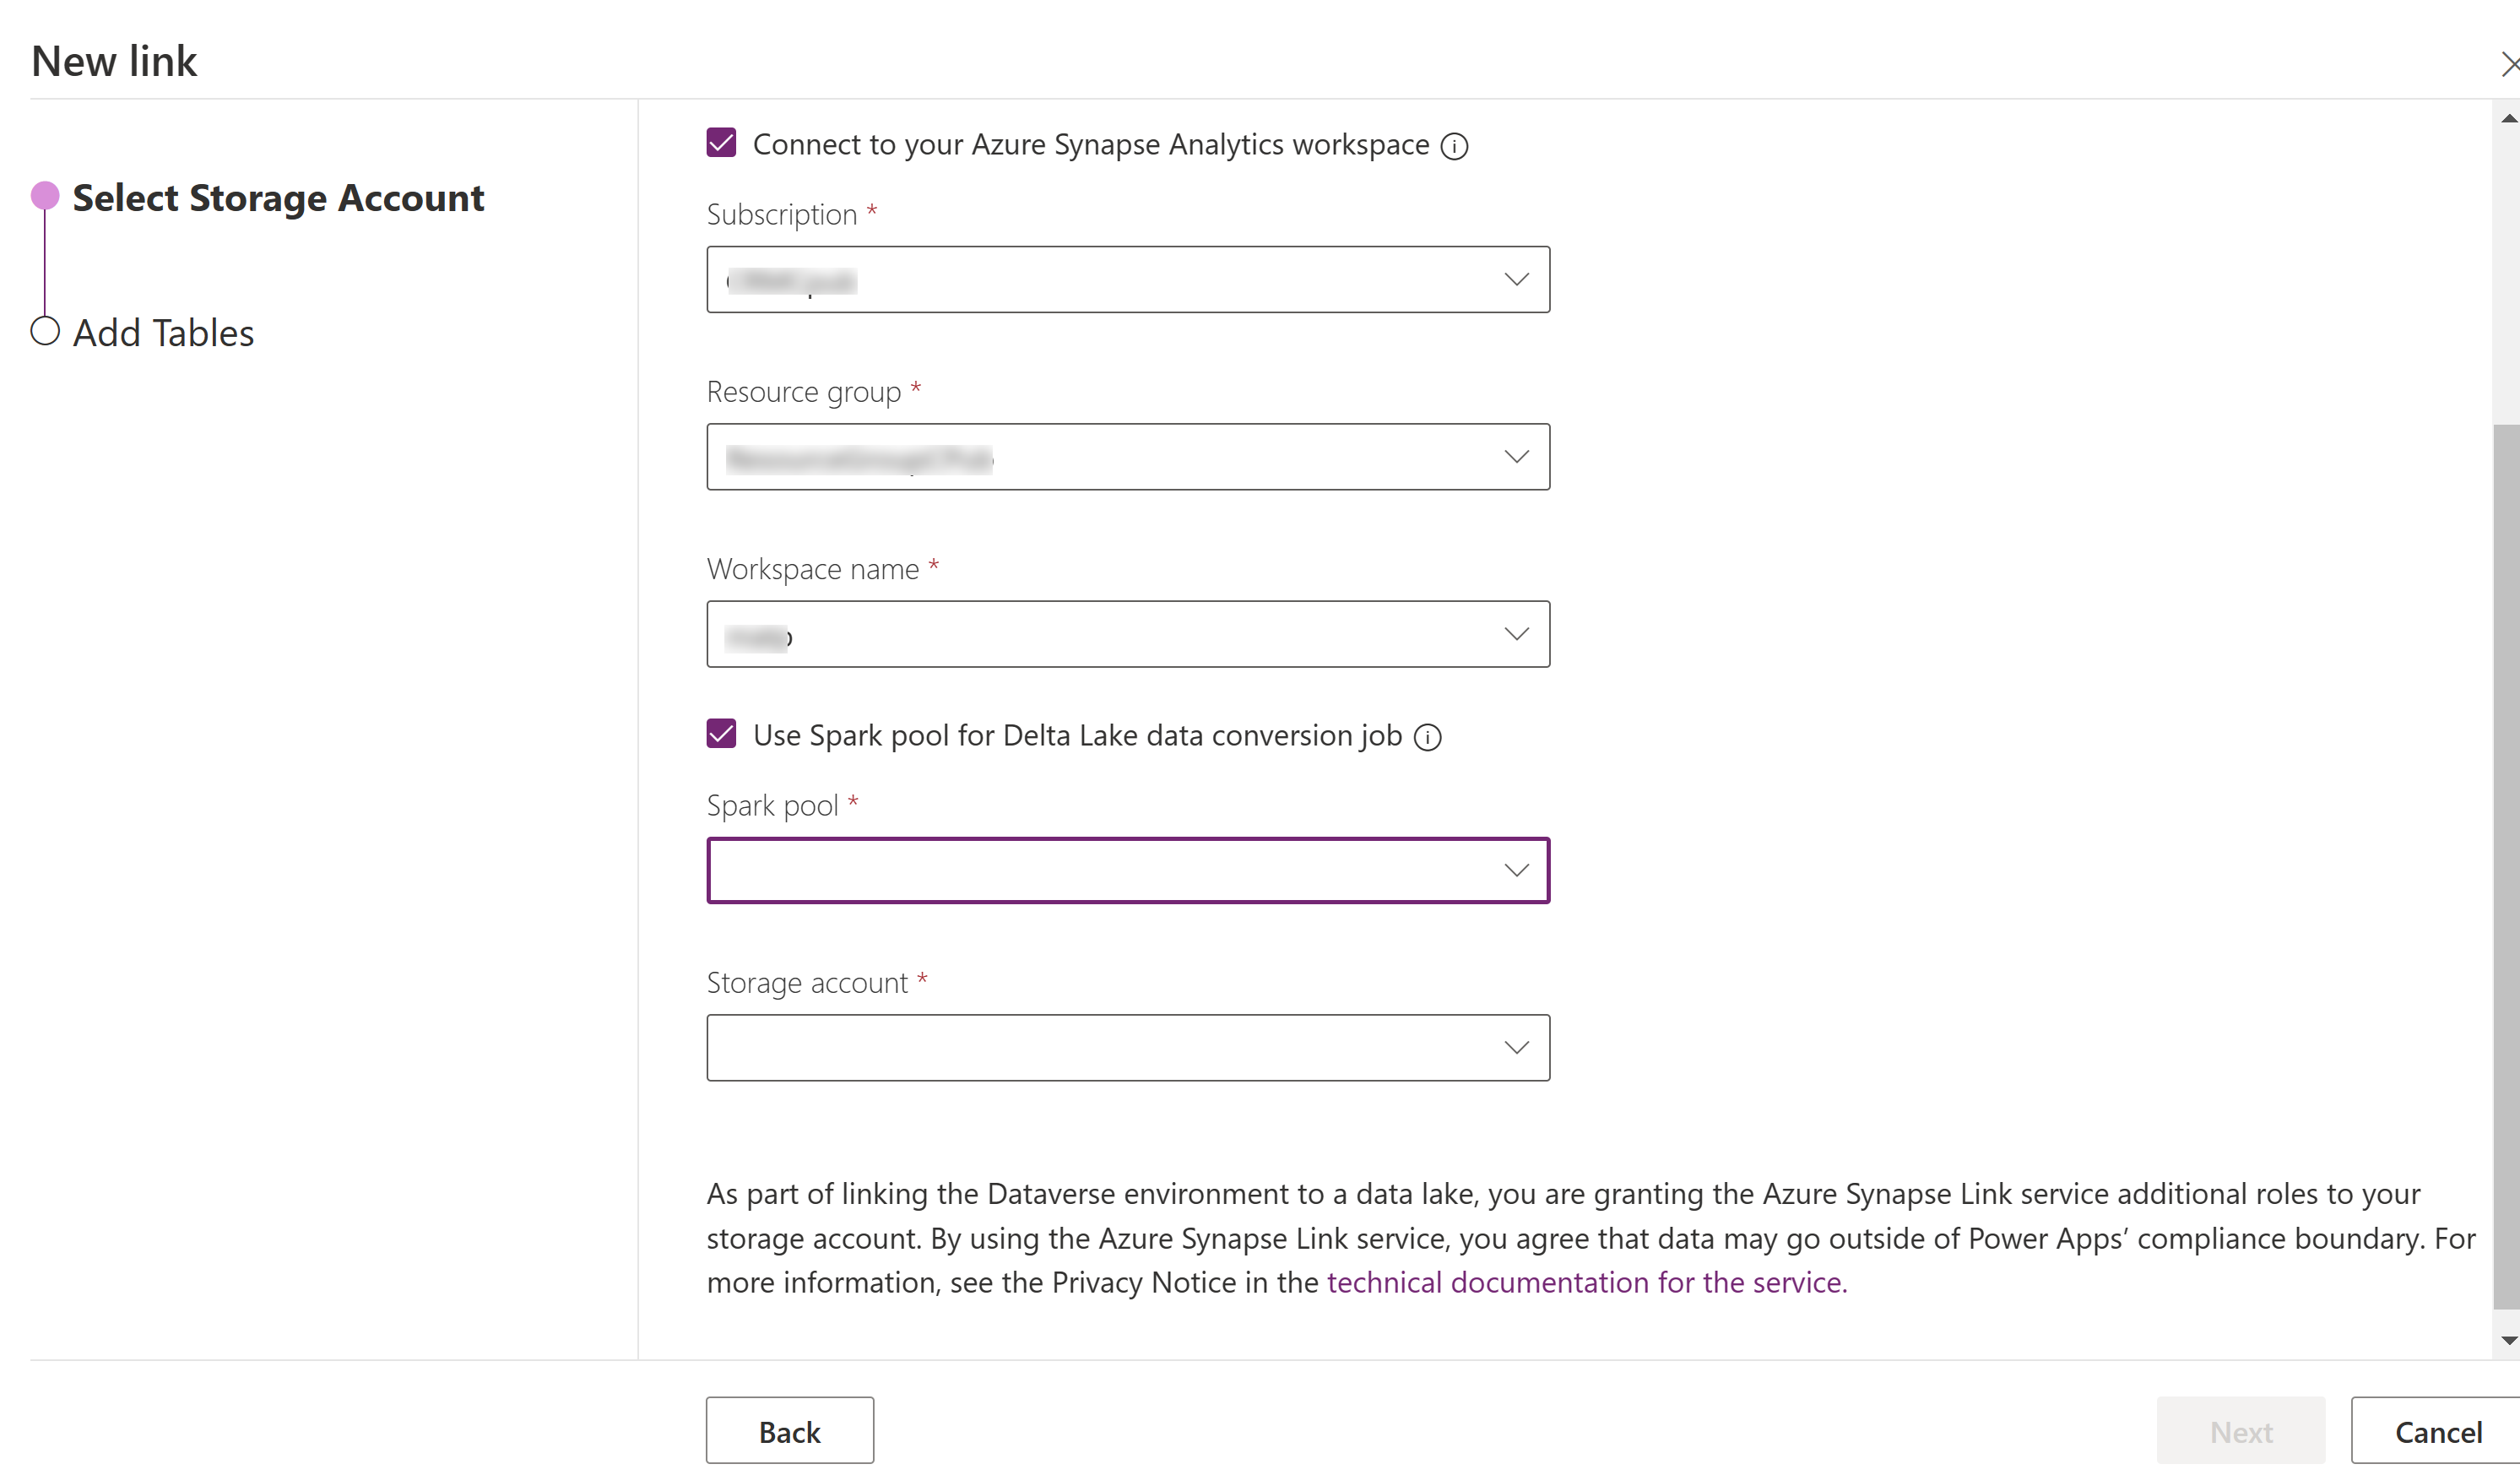 Azure Synapse Link for Dataverse configuration that includes spark pool.